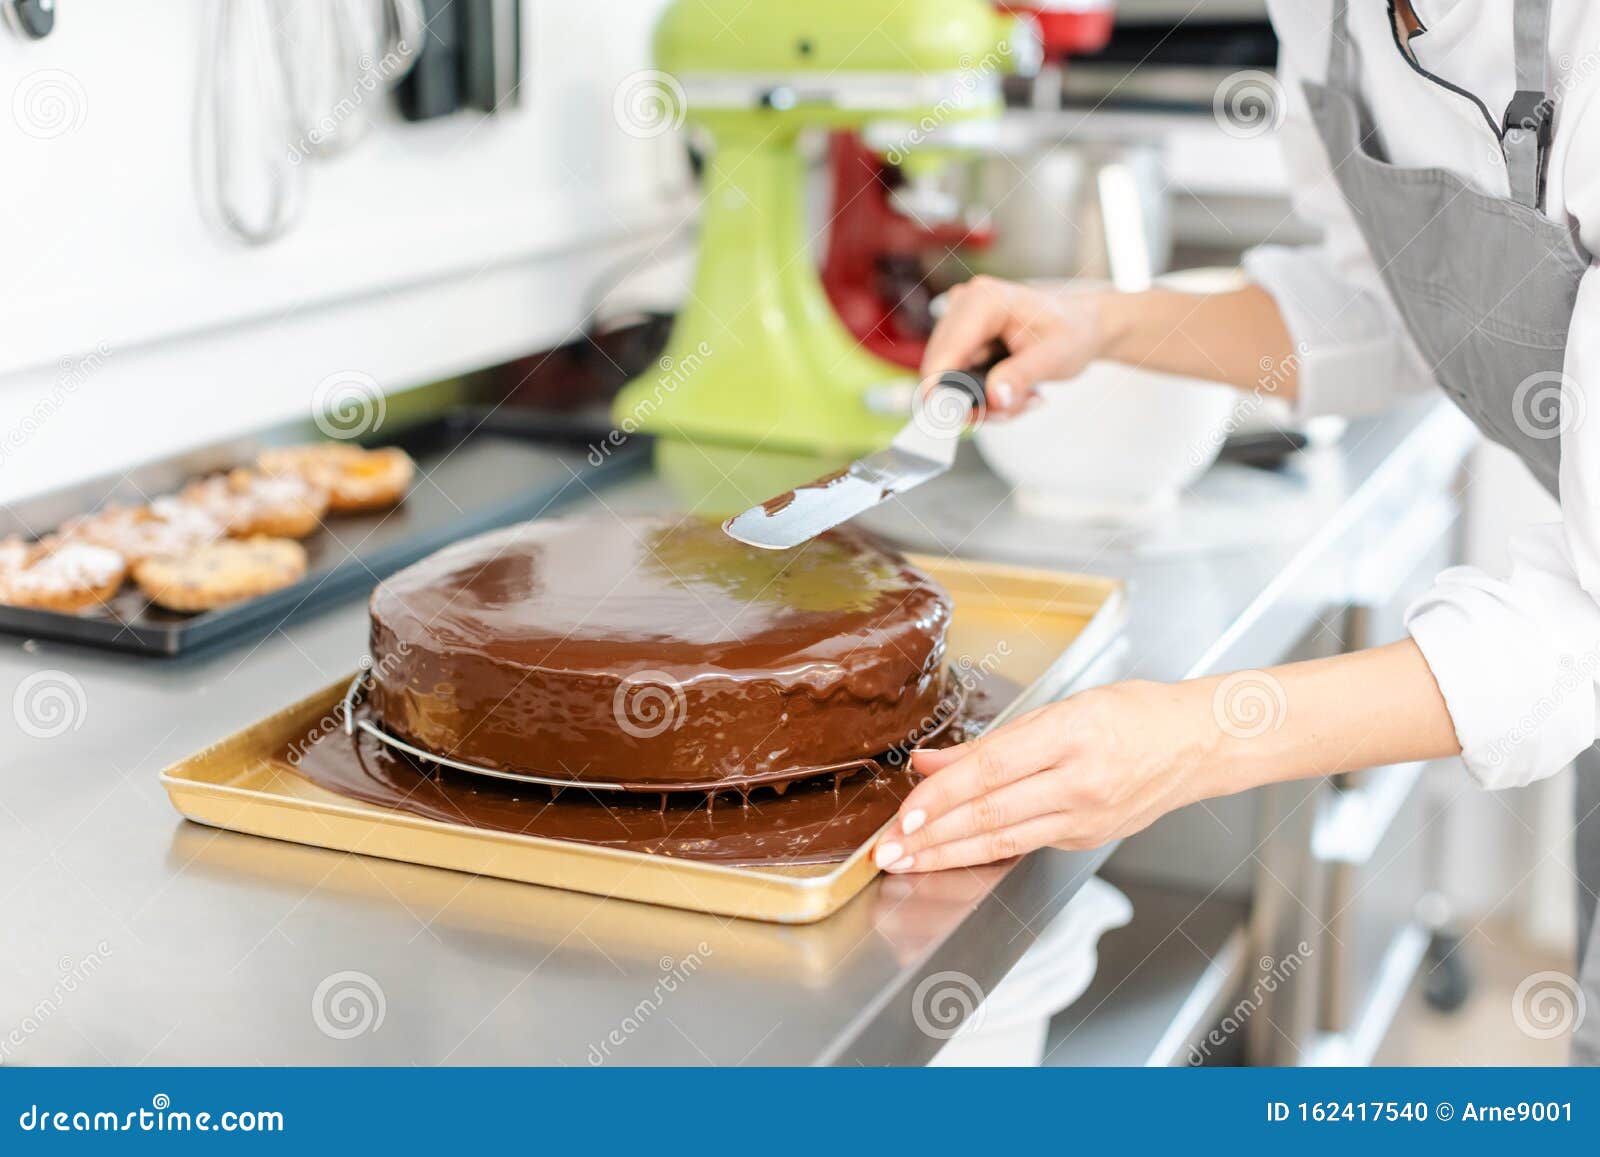 patissier pouring liquid chocolate on a cake